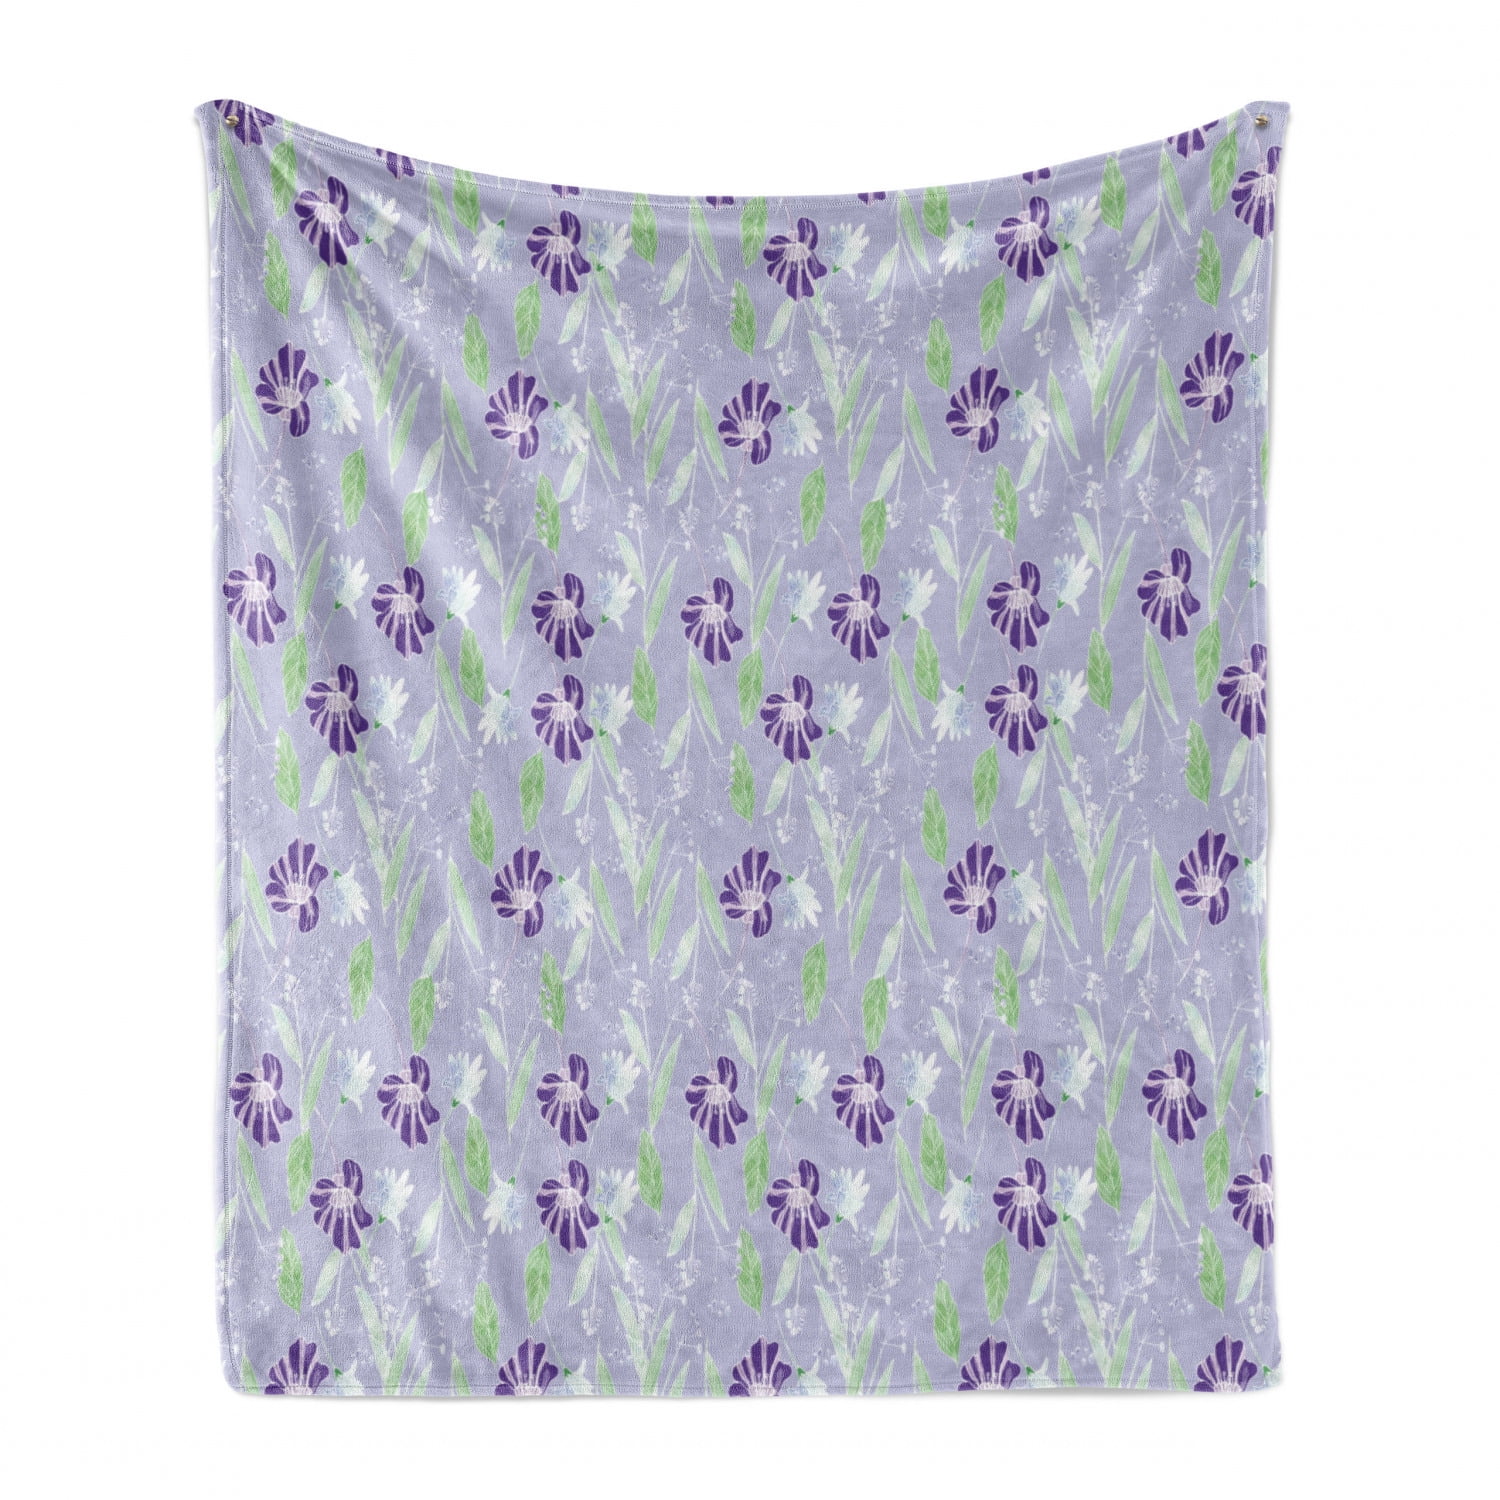 Lilac Tones Peduncles Hand Picked Flowers Sketch Style Pattern 50 x 60 Cozy Plush for Indoor and Outdoor Use Ambesonne Floral Soft Flannel Fleece Throw Blanket Ceil Blue Multicolor